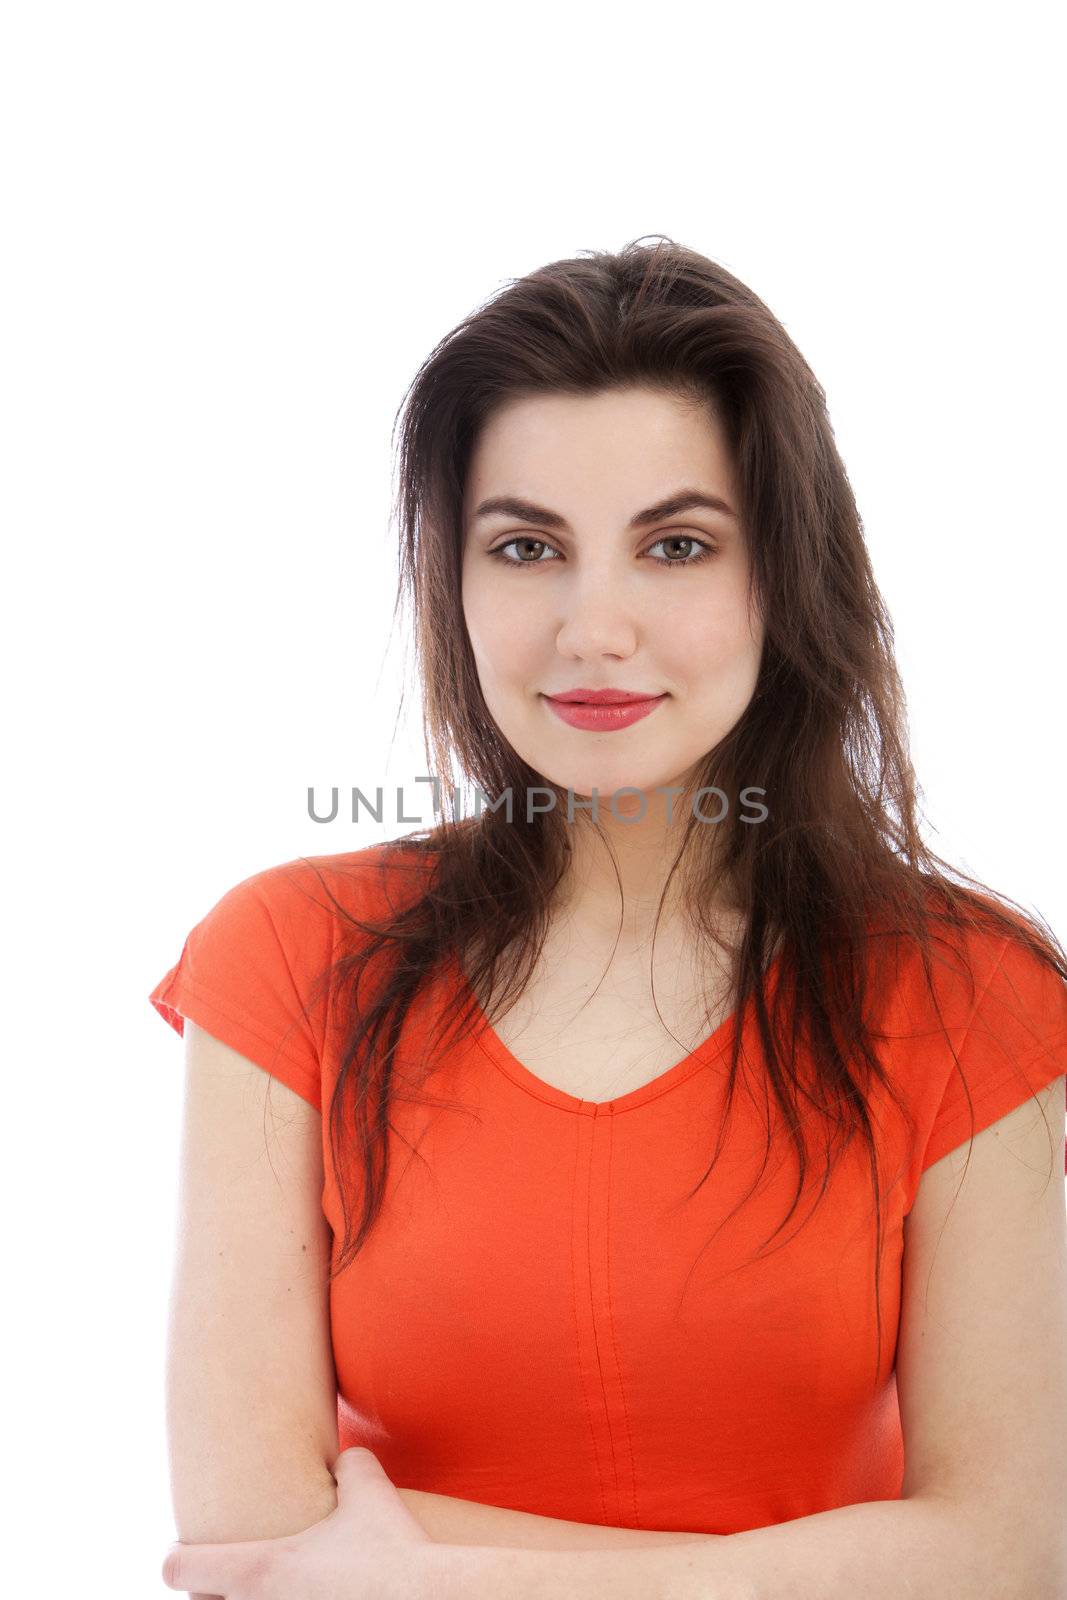 Young brunette Caucasian woman with red T-shirt smiling, portrait